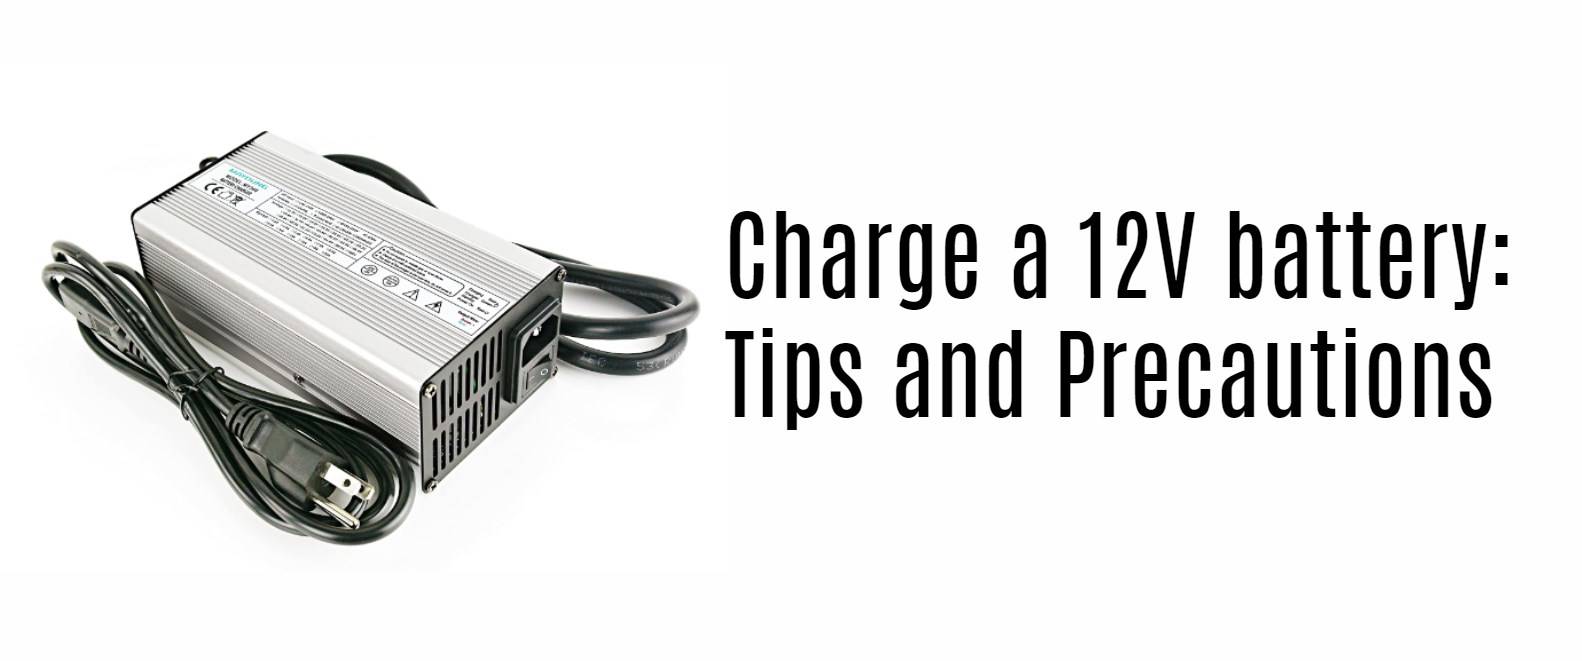 Charge a 12V battery:
Tips and Precautions